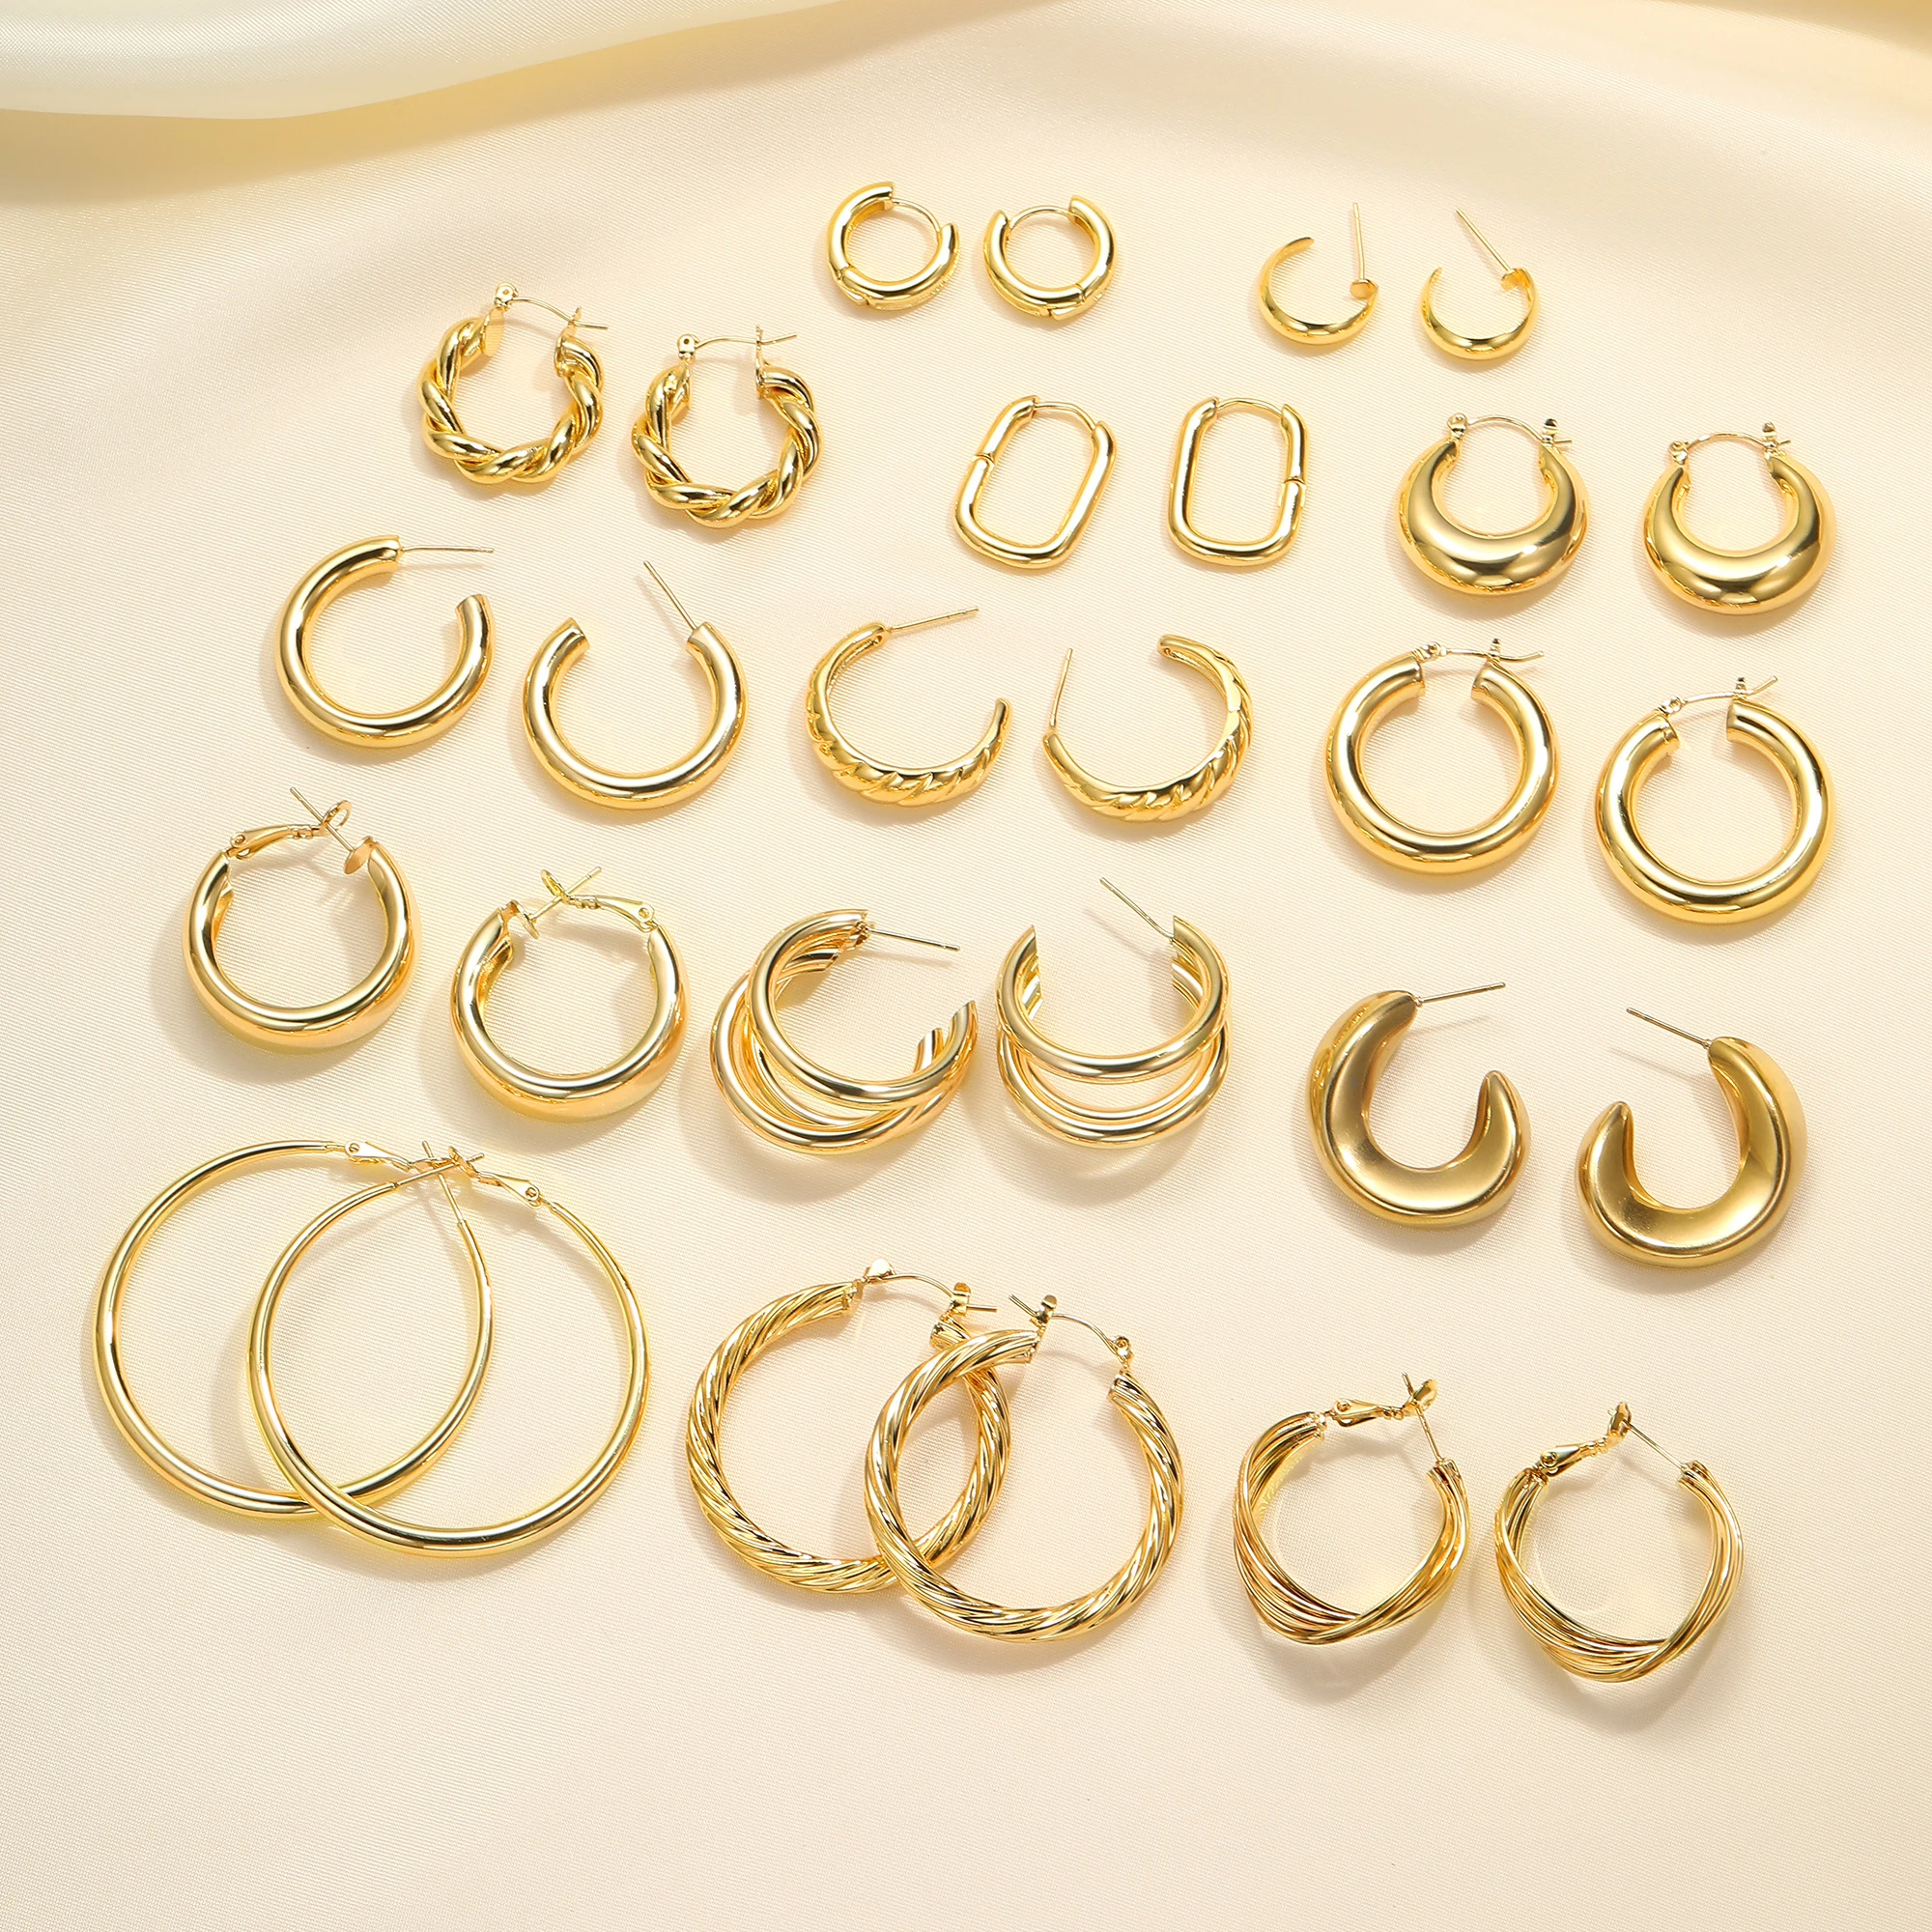 

Top Quality Statement Real Gold Plated Big Hoop Earrings Women Non Tarnish Twisted Circle Earrings Jewelry For Gift